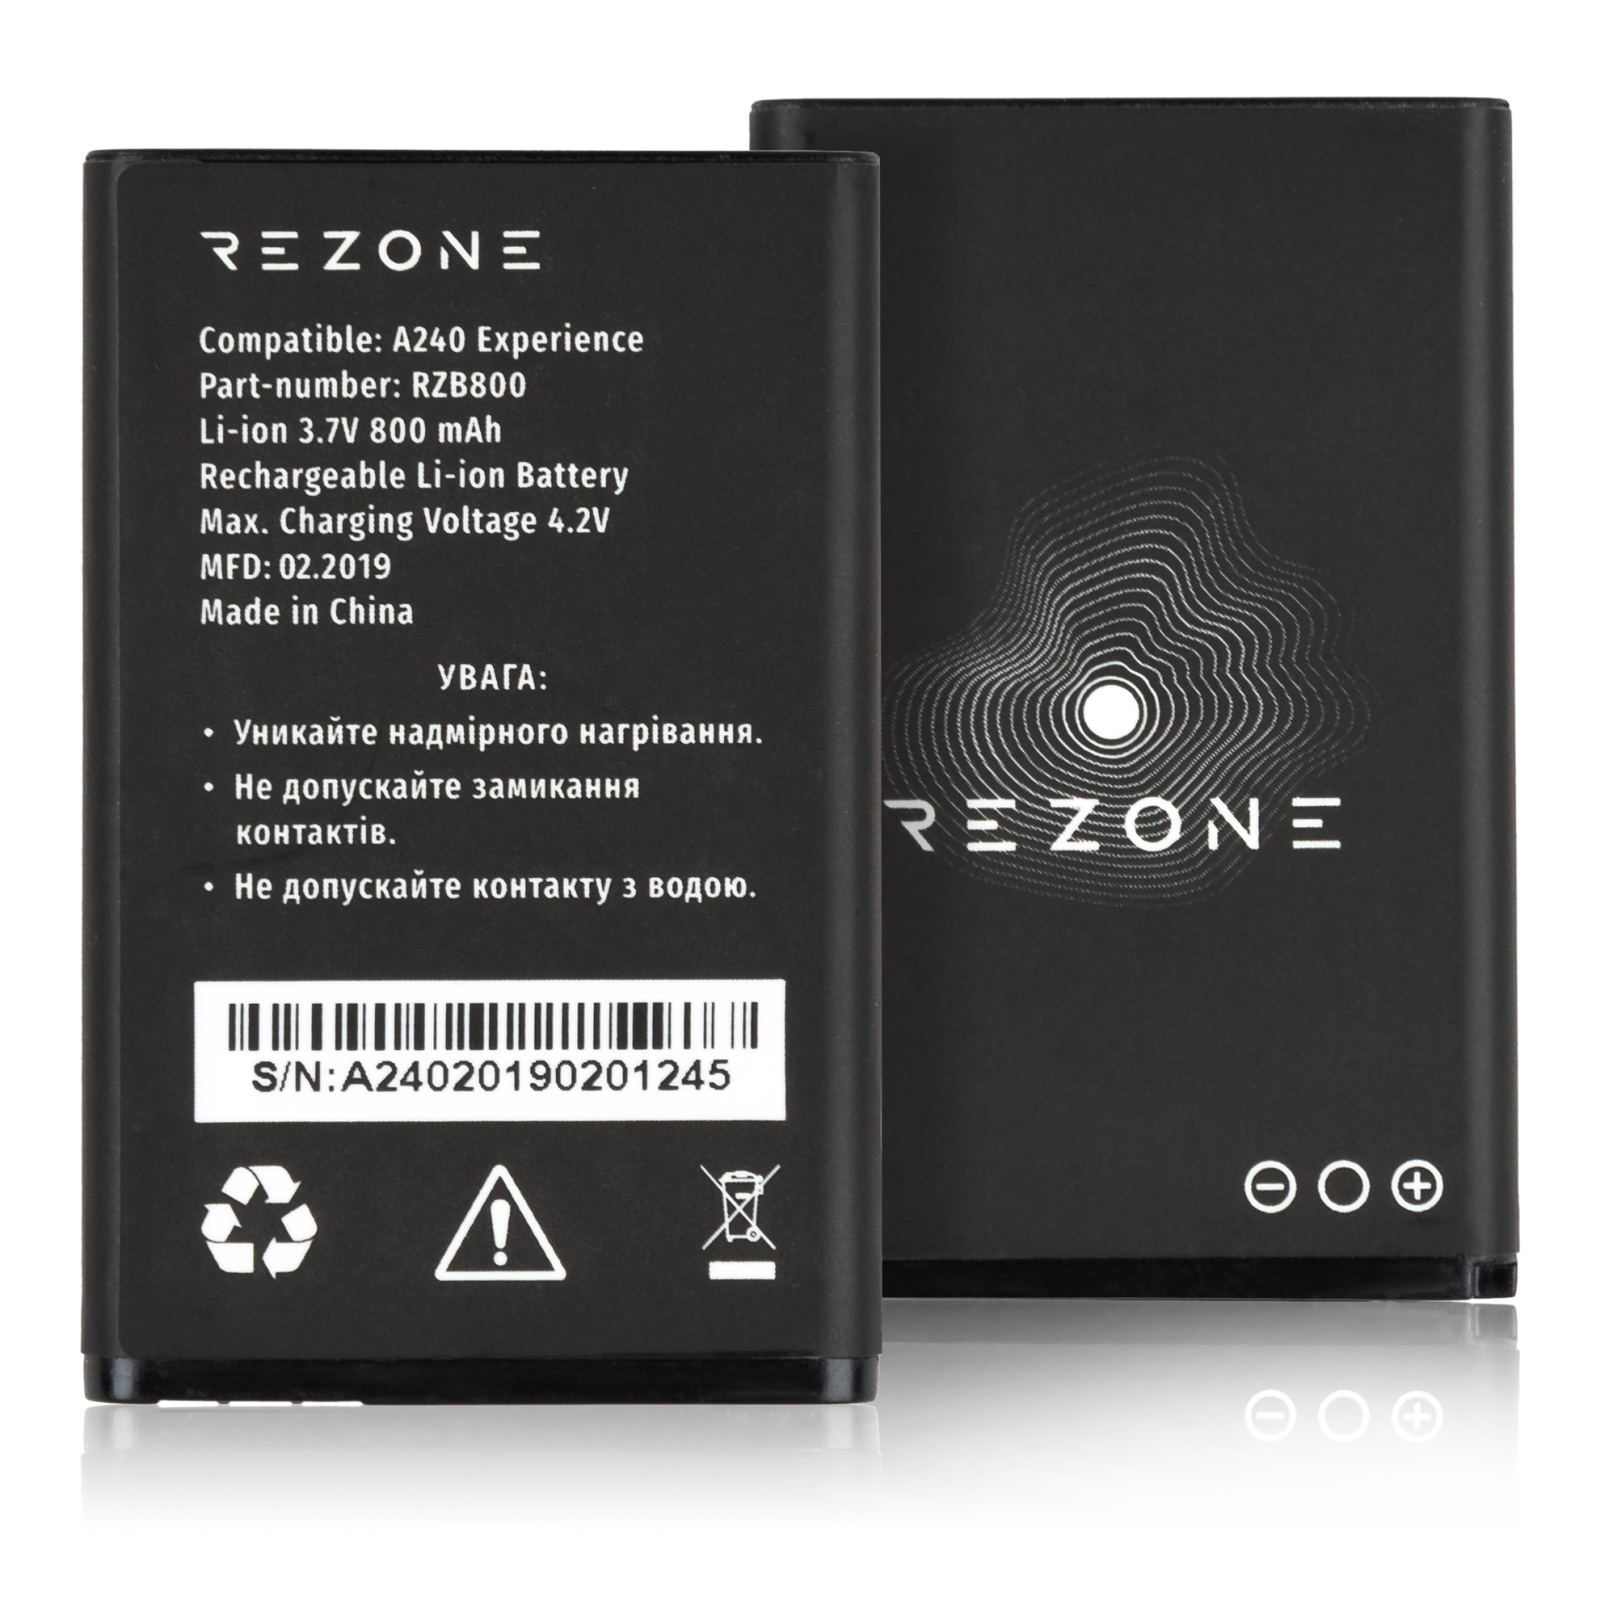 Аккумуляторная батарея Rezone for A240 Experience 800mah (and all compatible with BL-5C) (BL-5C) изображение 3